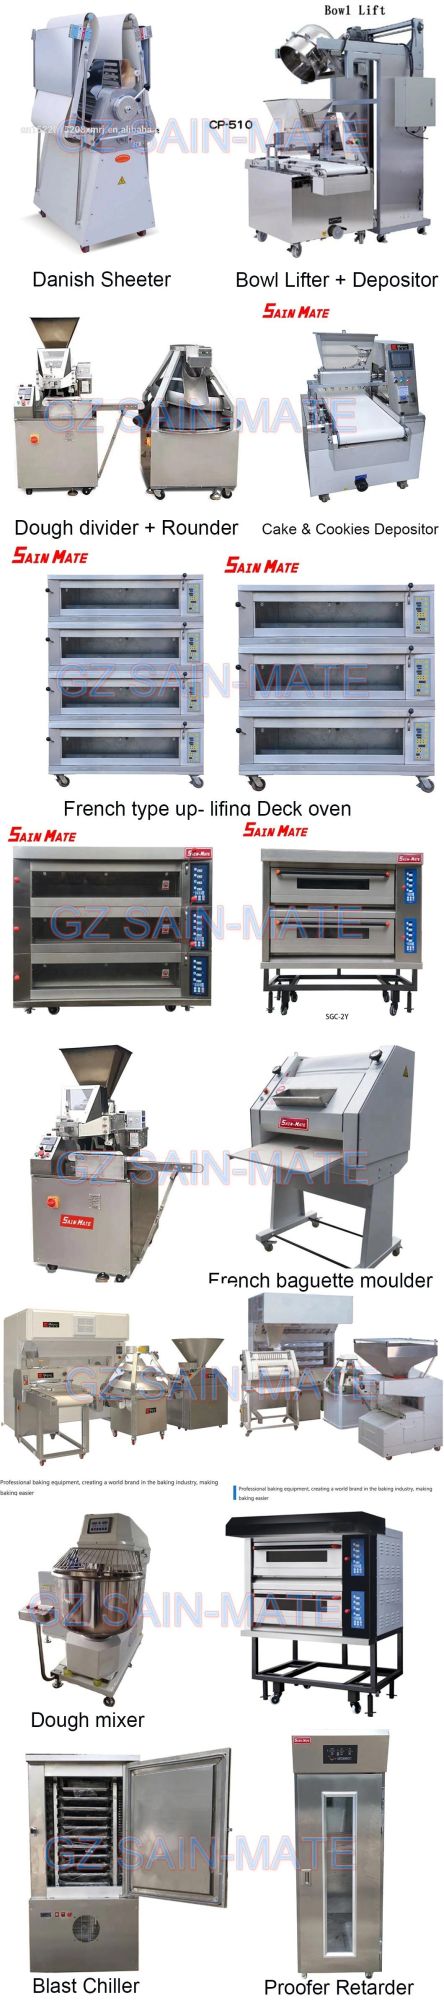 Industrial 32 Trays Gas Diesel Electric Bakery Bread/Cake/Biscuits Rotary Baking Convection Oven